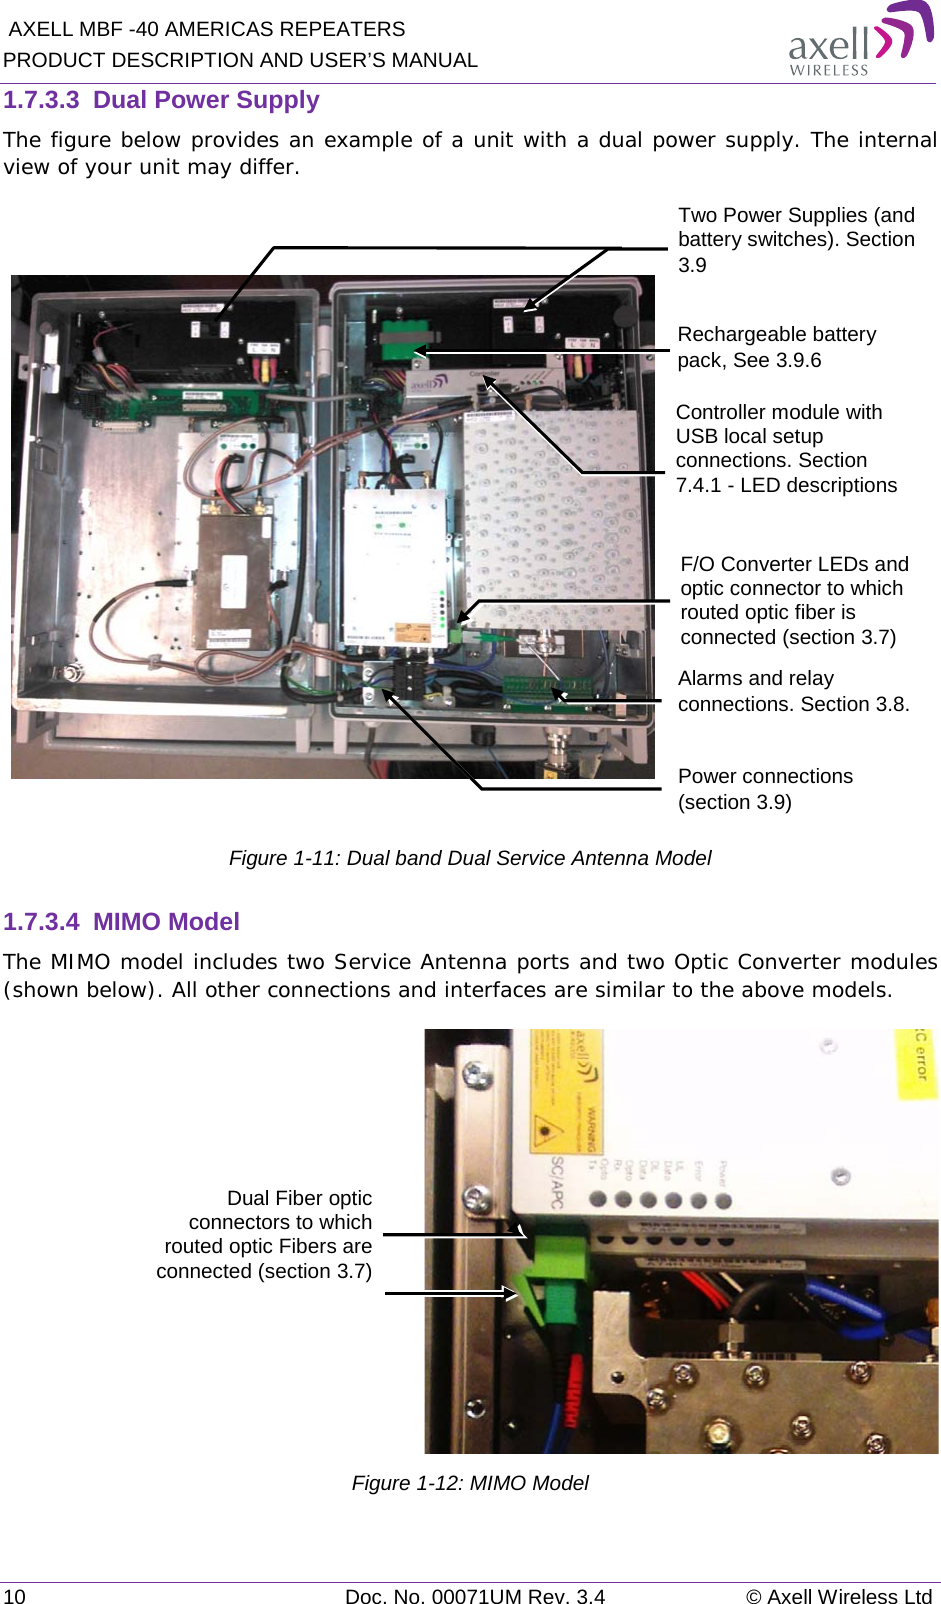  AXELL MBF -40 AMERICAS REPEATERS PRODUCT DESCRIPTION AND USER’S MANUAL 10 Doc. No. 00071UM Rev. 3.4 © Axell Wireless Ltd 1.7.3.3  Dual Power Supply The figure below provides an example of a unit with a dual power supply. The internal view of your unit may differ.       Figure  1-11: Dual band Dual Service Antenna Model 1.7.3.4  MIMO Model The MIMO model includes two Service Antenna ports and two Optic Converter modules (shown below). All other connections and interfaces are similar to the above models.  Figure  1-12: MIMO Model Dual Fiber optic connectors to which routed optic Fibers are connected (section  3.7) F/O Converter LEDs and optic connector to which routed optic fiber is connected (section  3.7) Power connections (section  3.9) Controller module with USB local setup connections. Section  7.4.1 - LED descriptions Rechargeable battery pack, See  3.9.6 Two Power Supplies (and battery switches). Section  3.9  Alarms and relay connections. Section  3.8.  